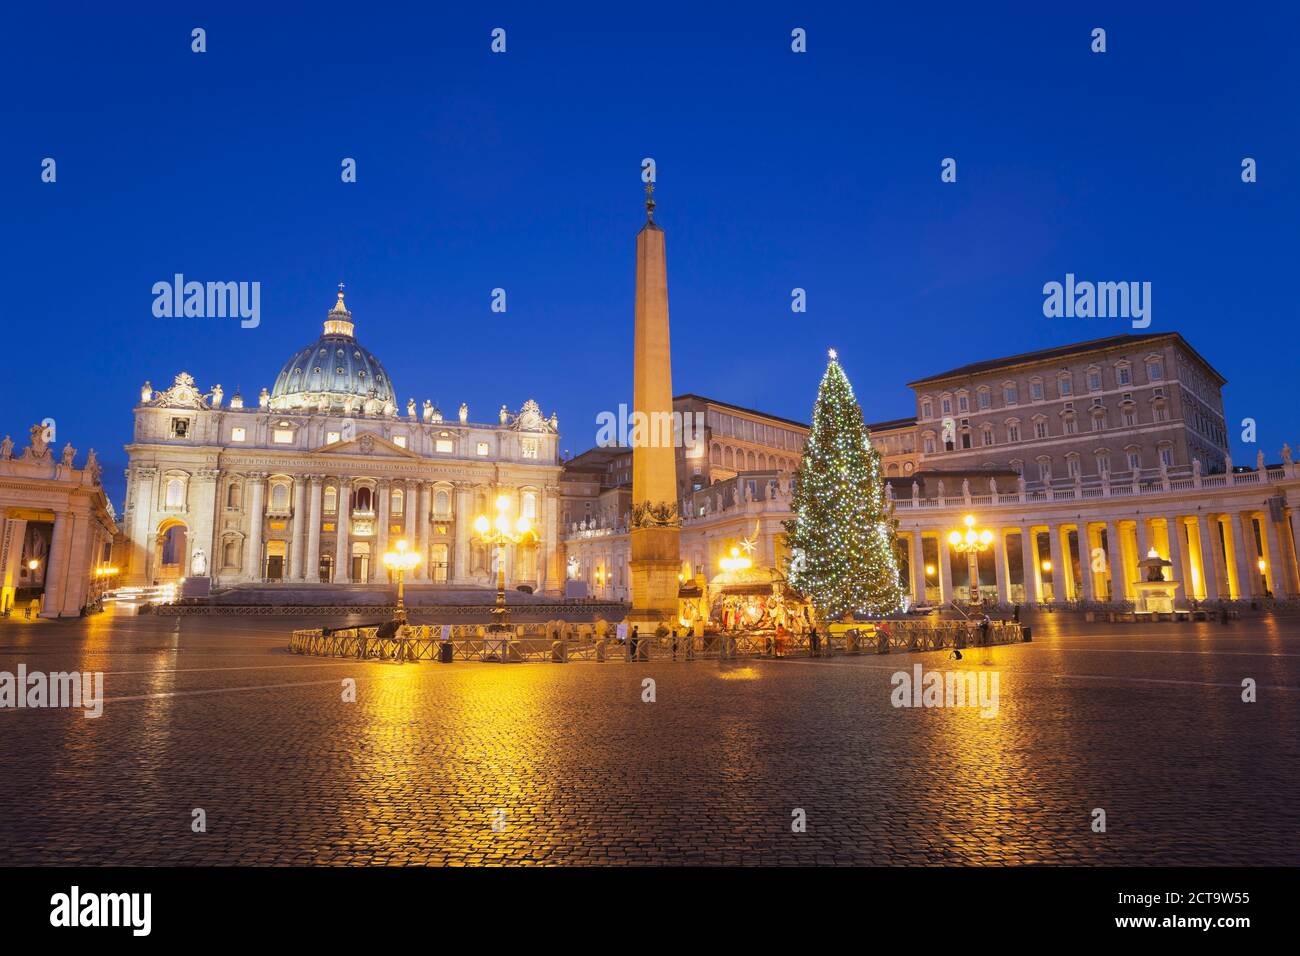 Italy, Vatican, Rome, Piazza San Pietro, St. Peter's Basilica and Christmas tree in the morning Stock Photo